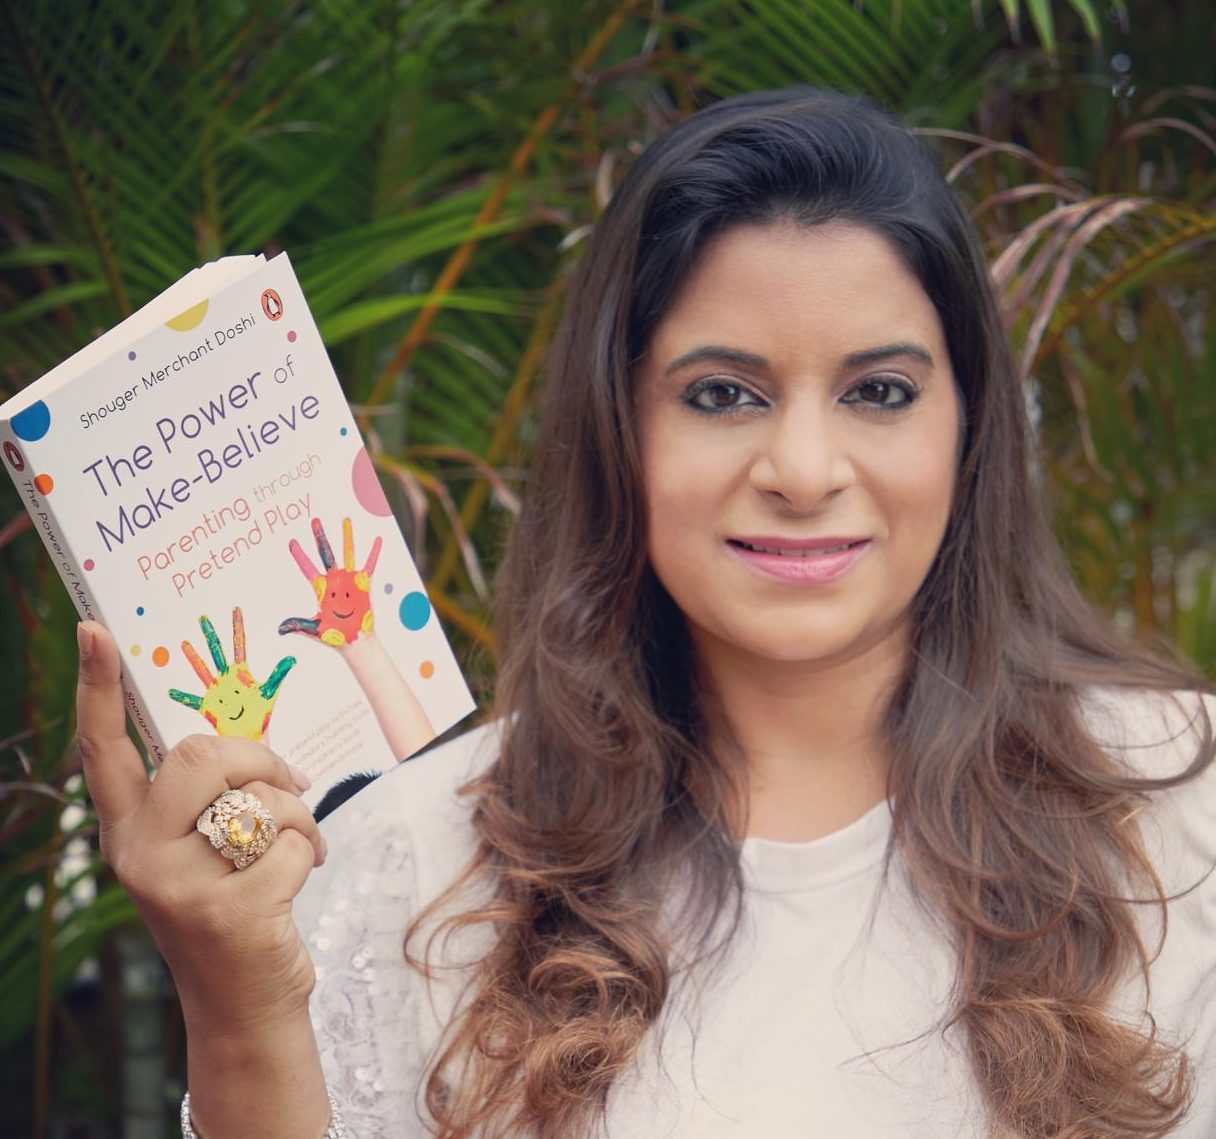 Author Shouger Merchant Doshi | The Power of Make-Believe: Parenting Through Pretend Play | Interview